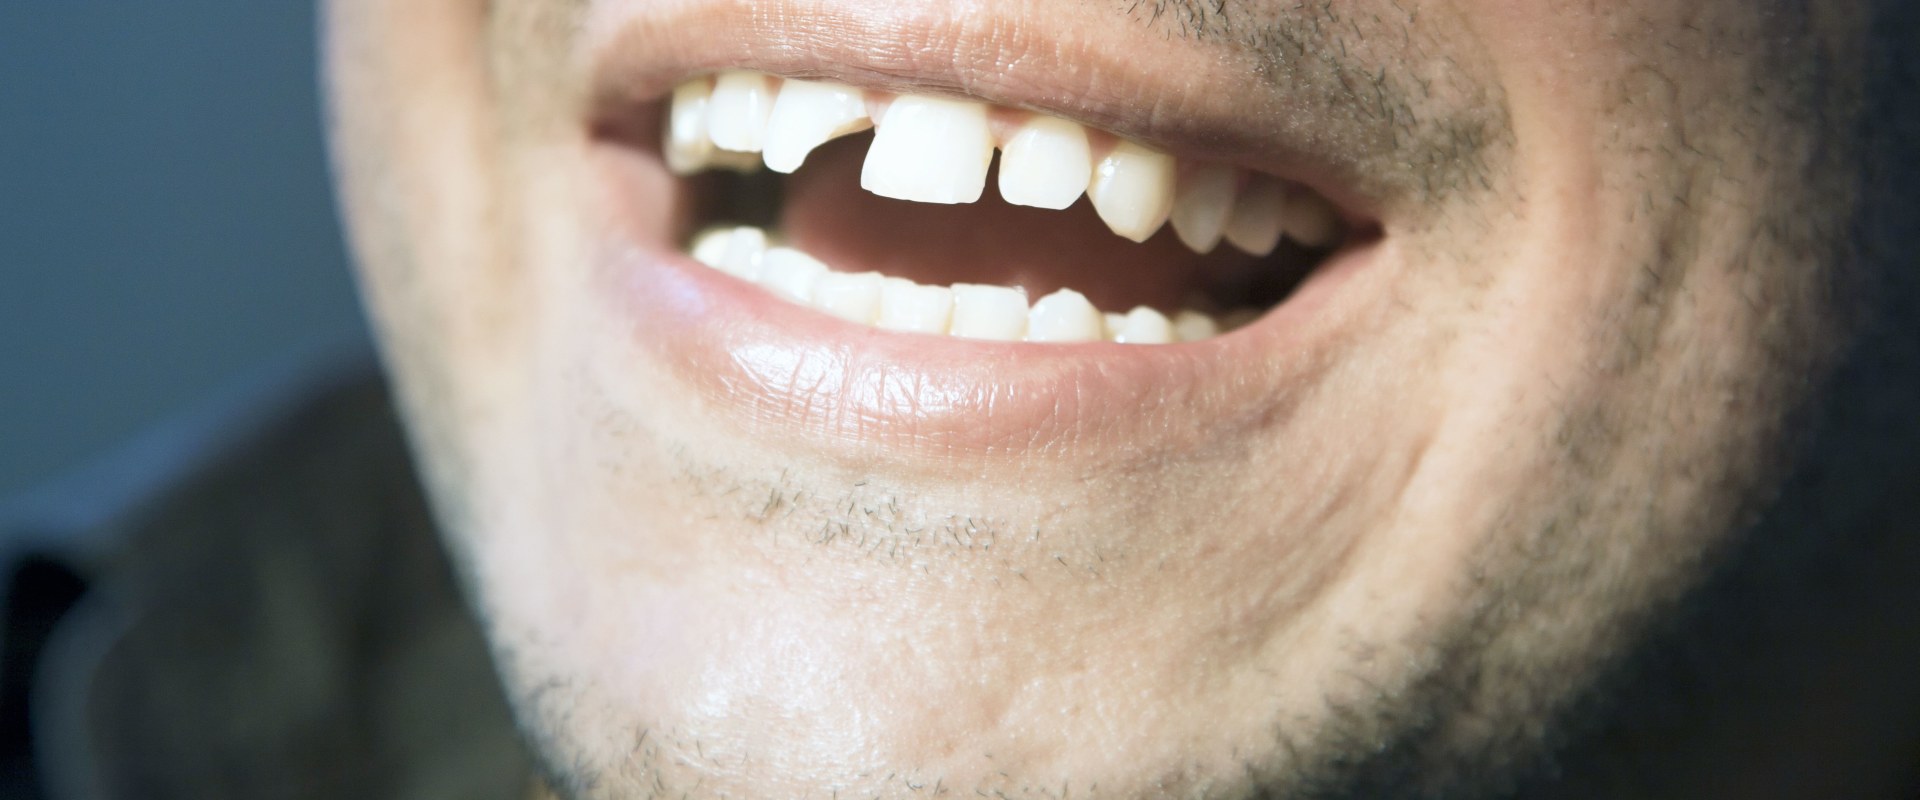 Can a Dentist Fix a Chipped Tooth in One Day?